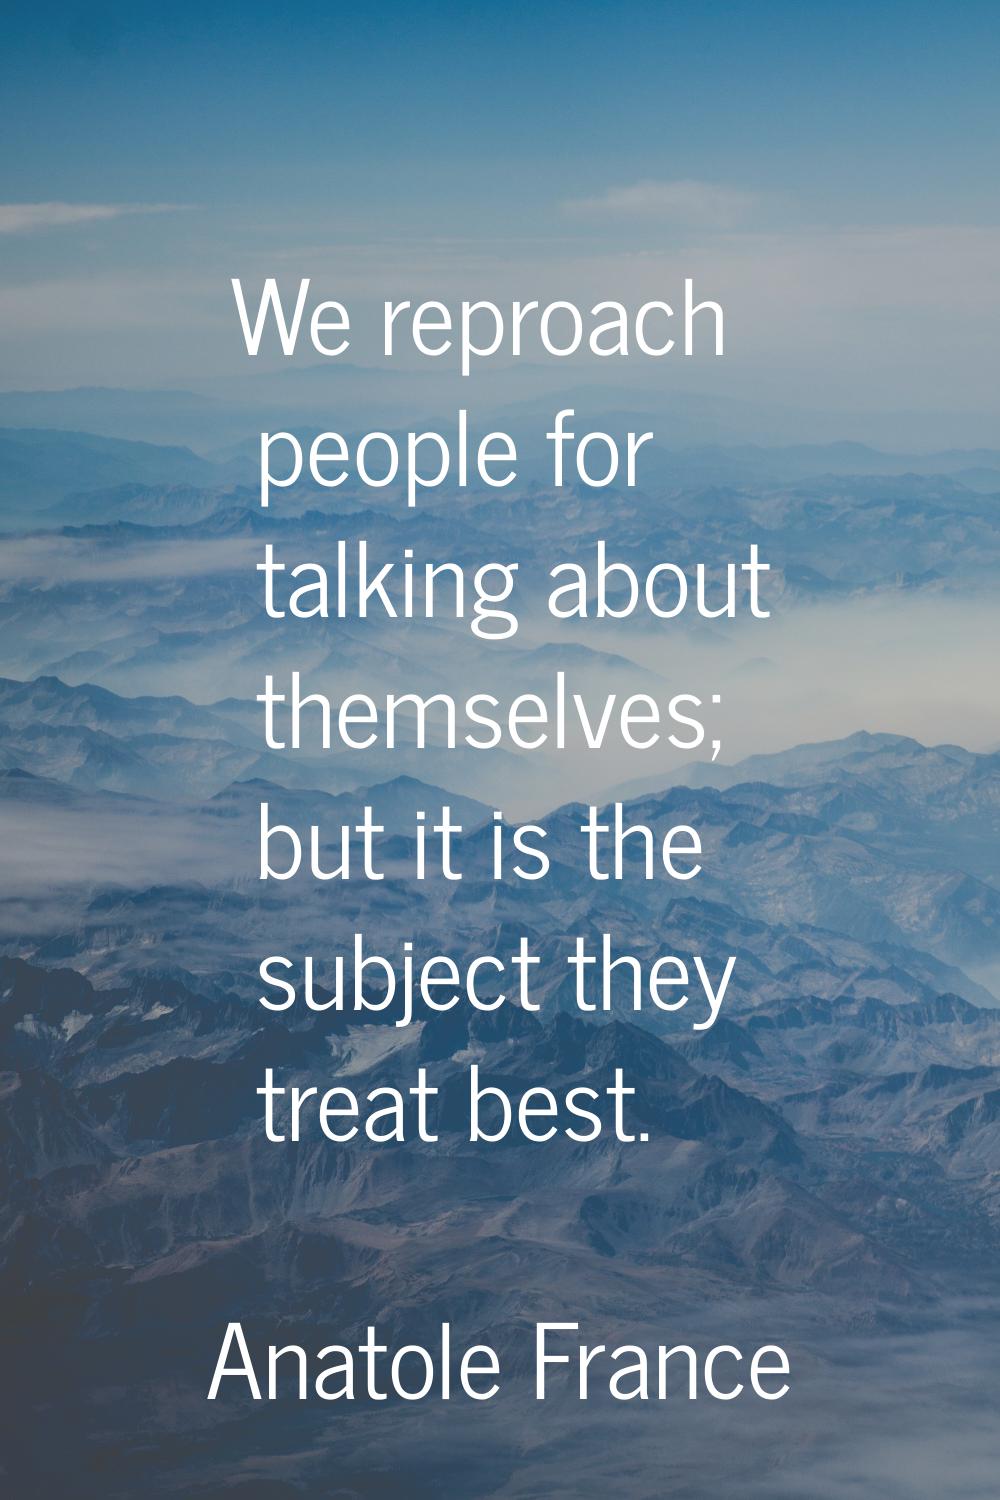 We reproach people for talking about themselves; but it is the subject they treat best.